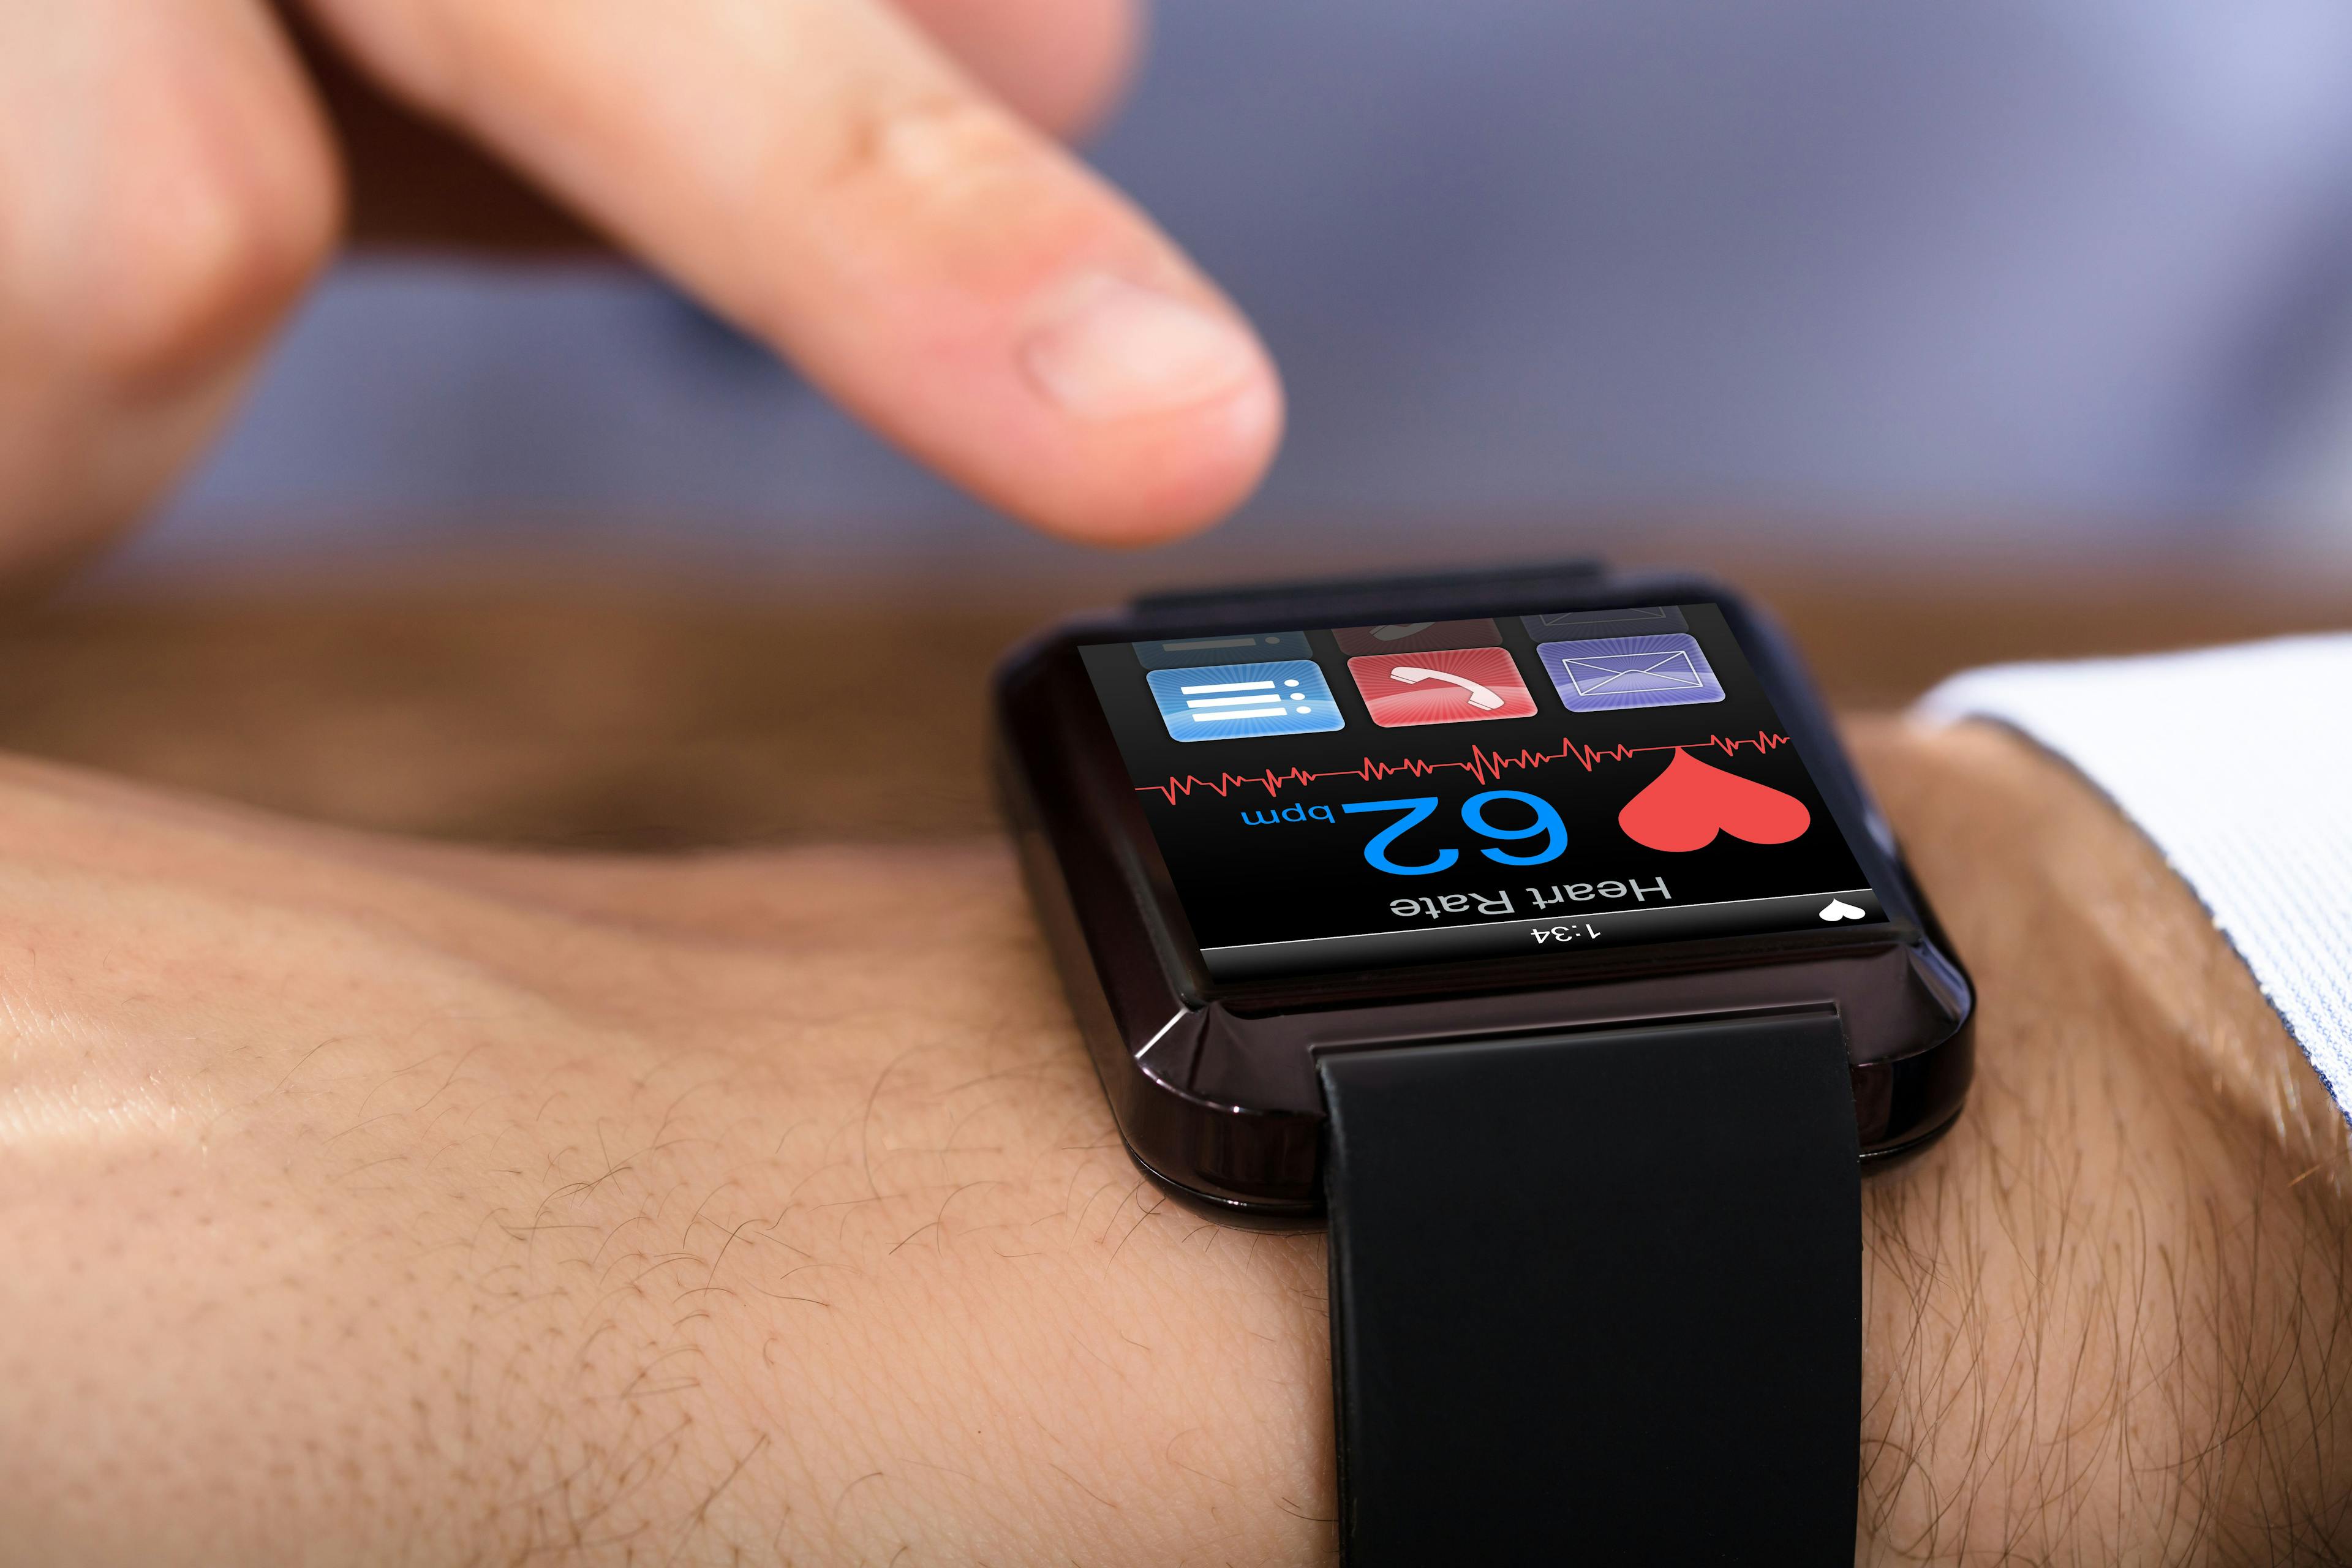 Study: Wearable Activity Trackers Have Potential to Support Decision Making, Clinical Care